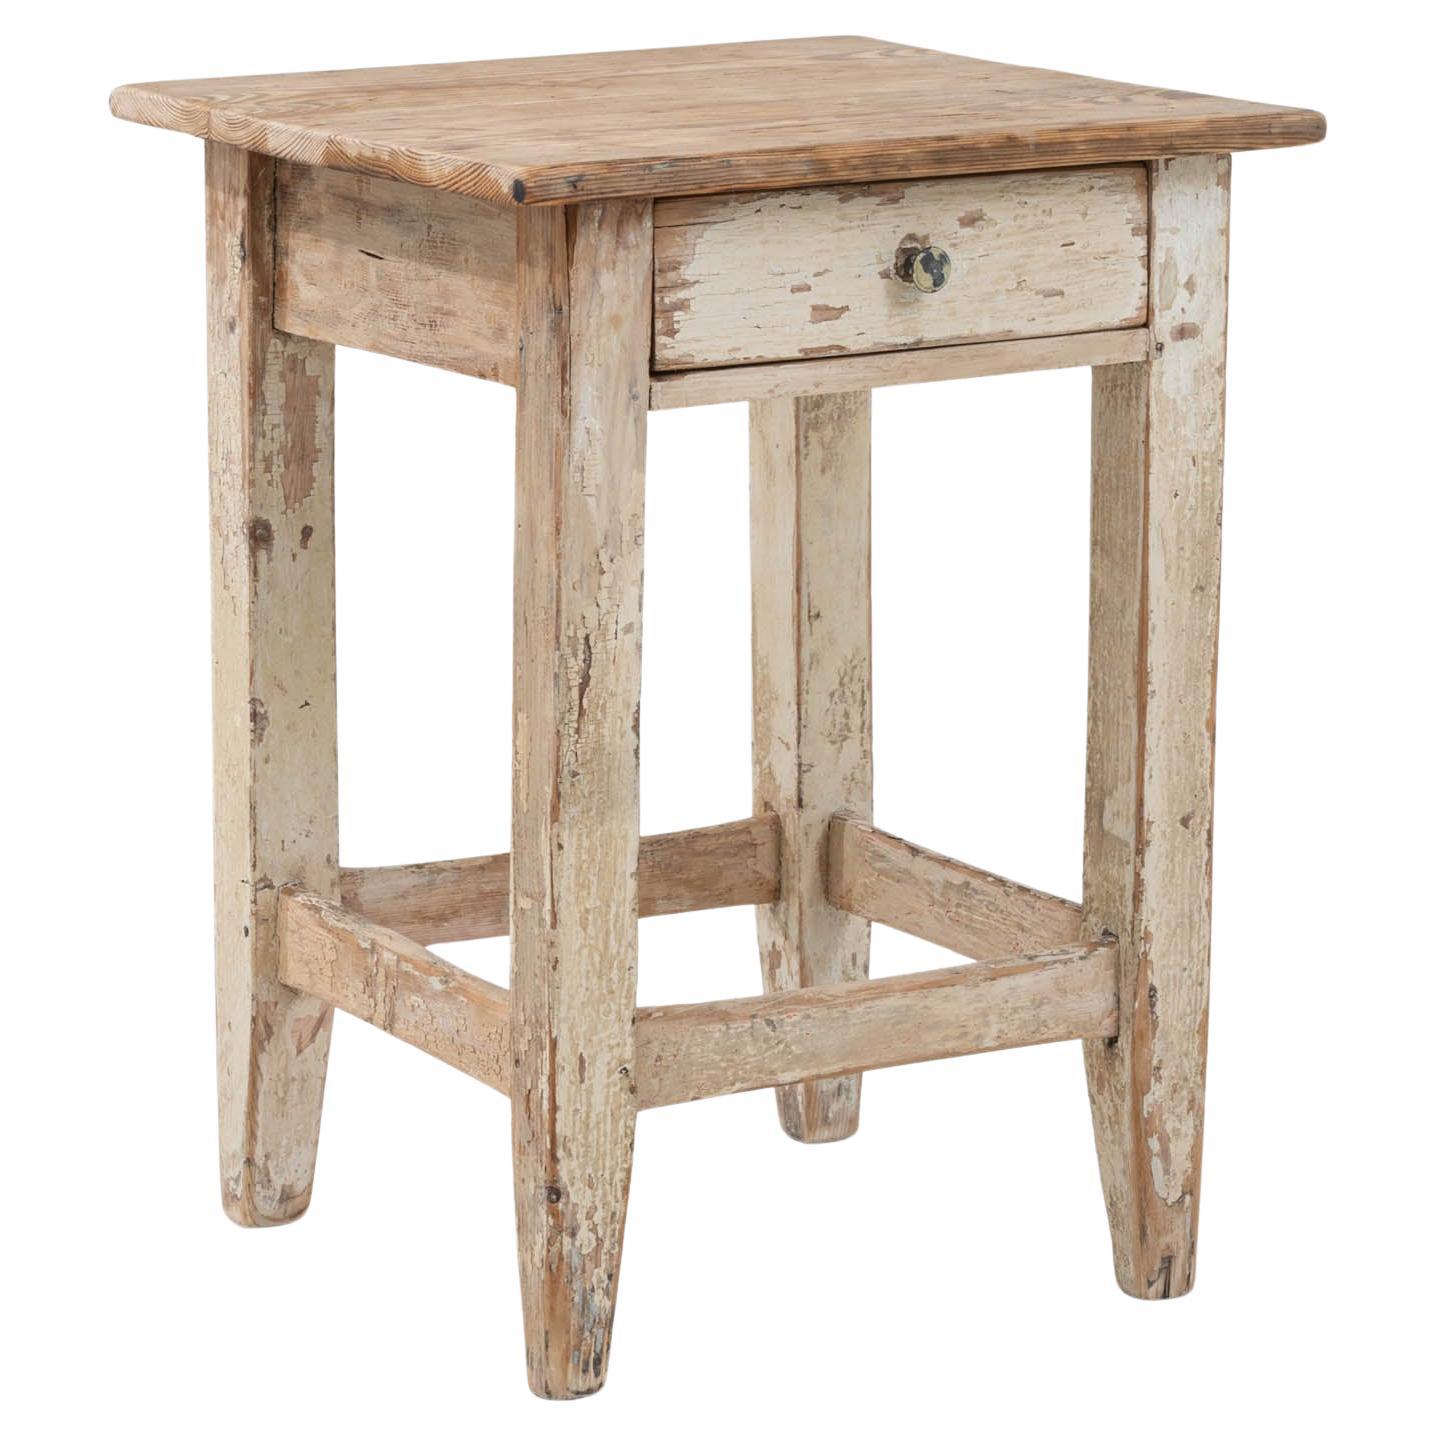 1900s Central European Wooden Stool For Sale